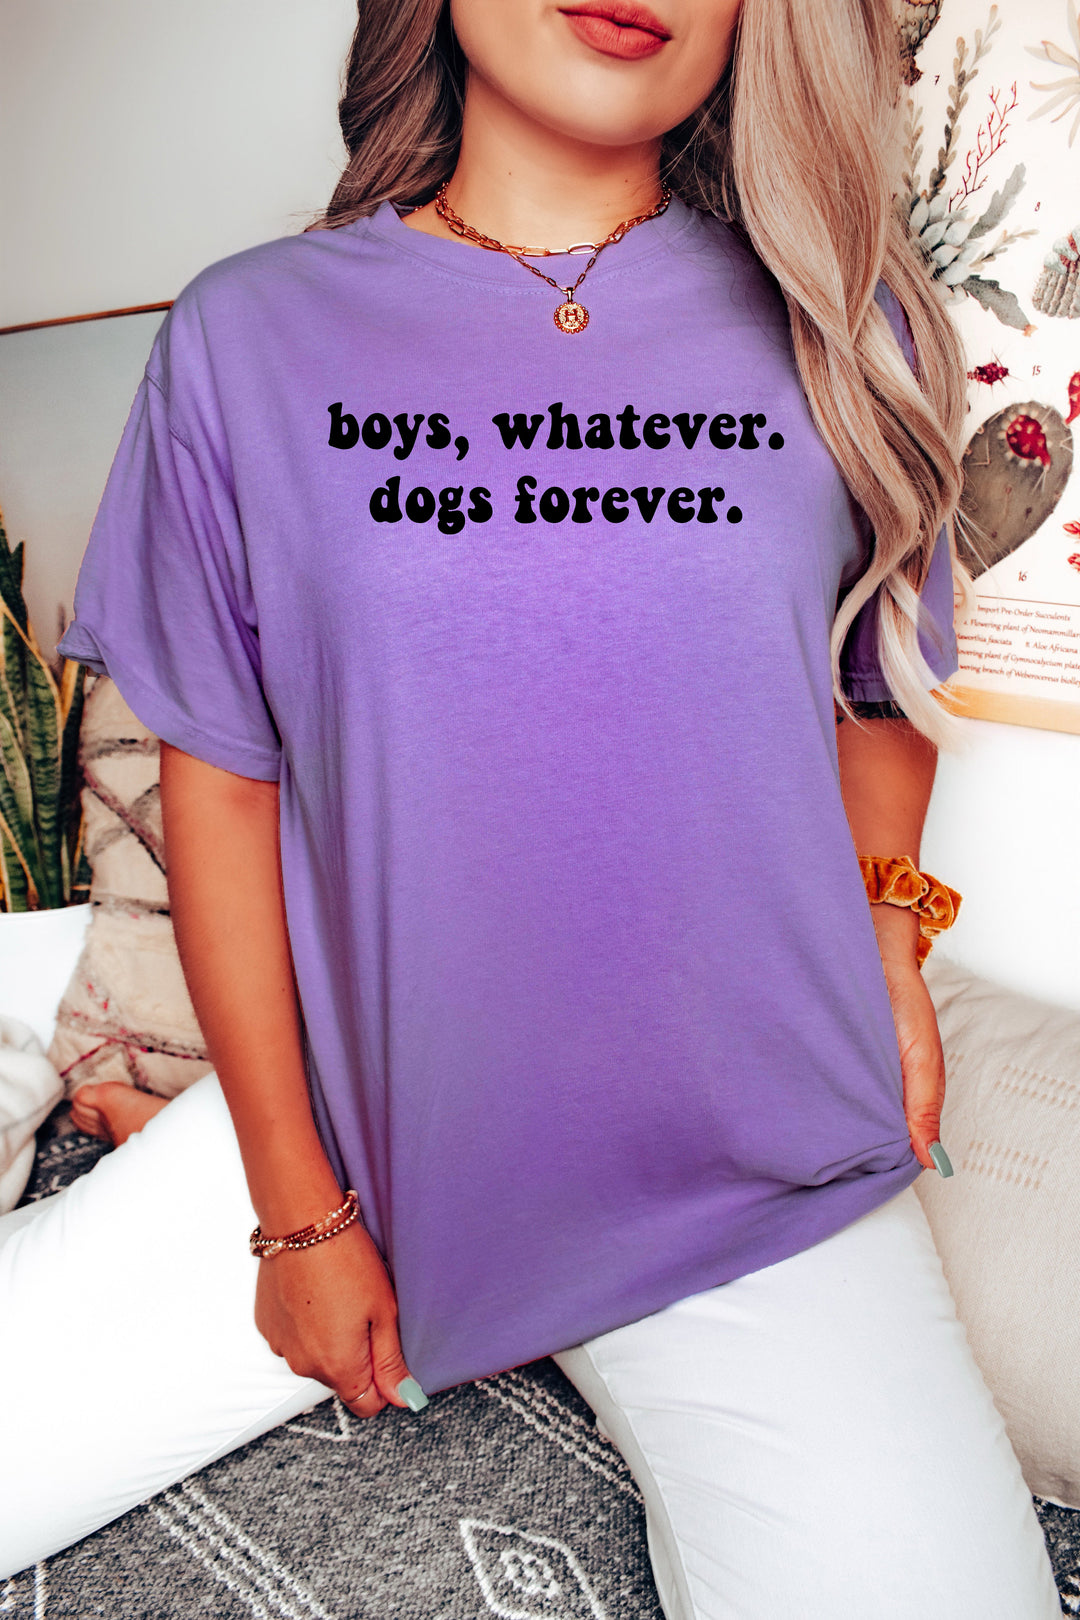 Glamfox - Boys Whatever Dogs Forever Graphic Tee [More Colors Available]